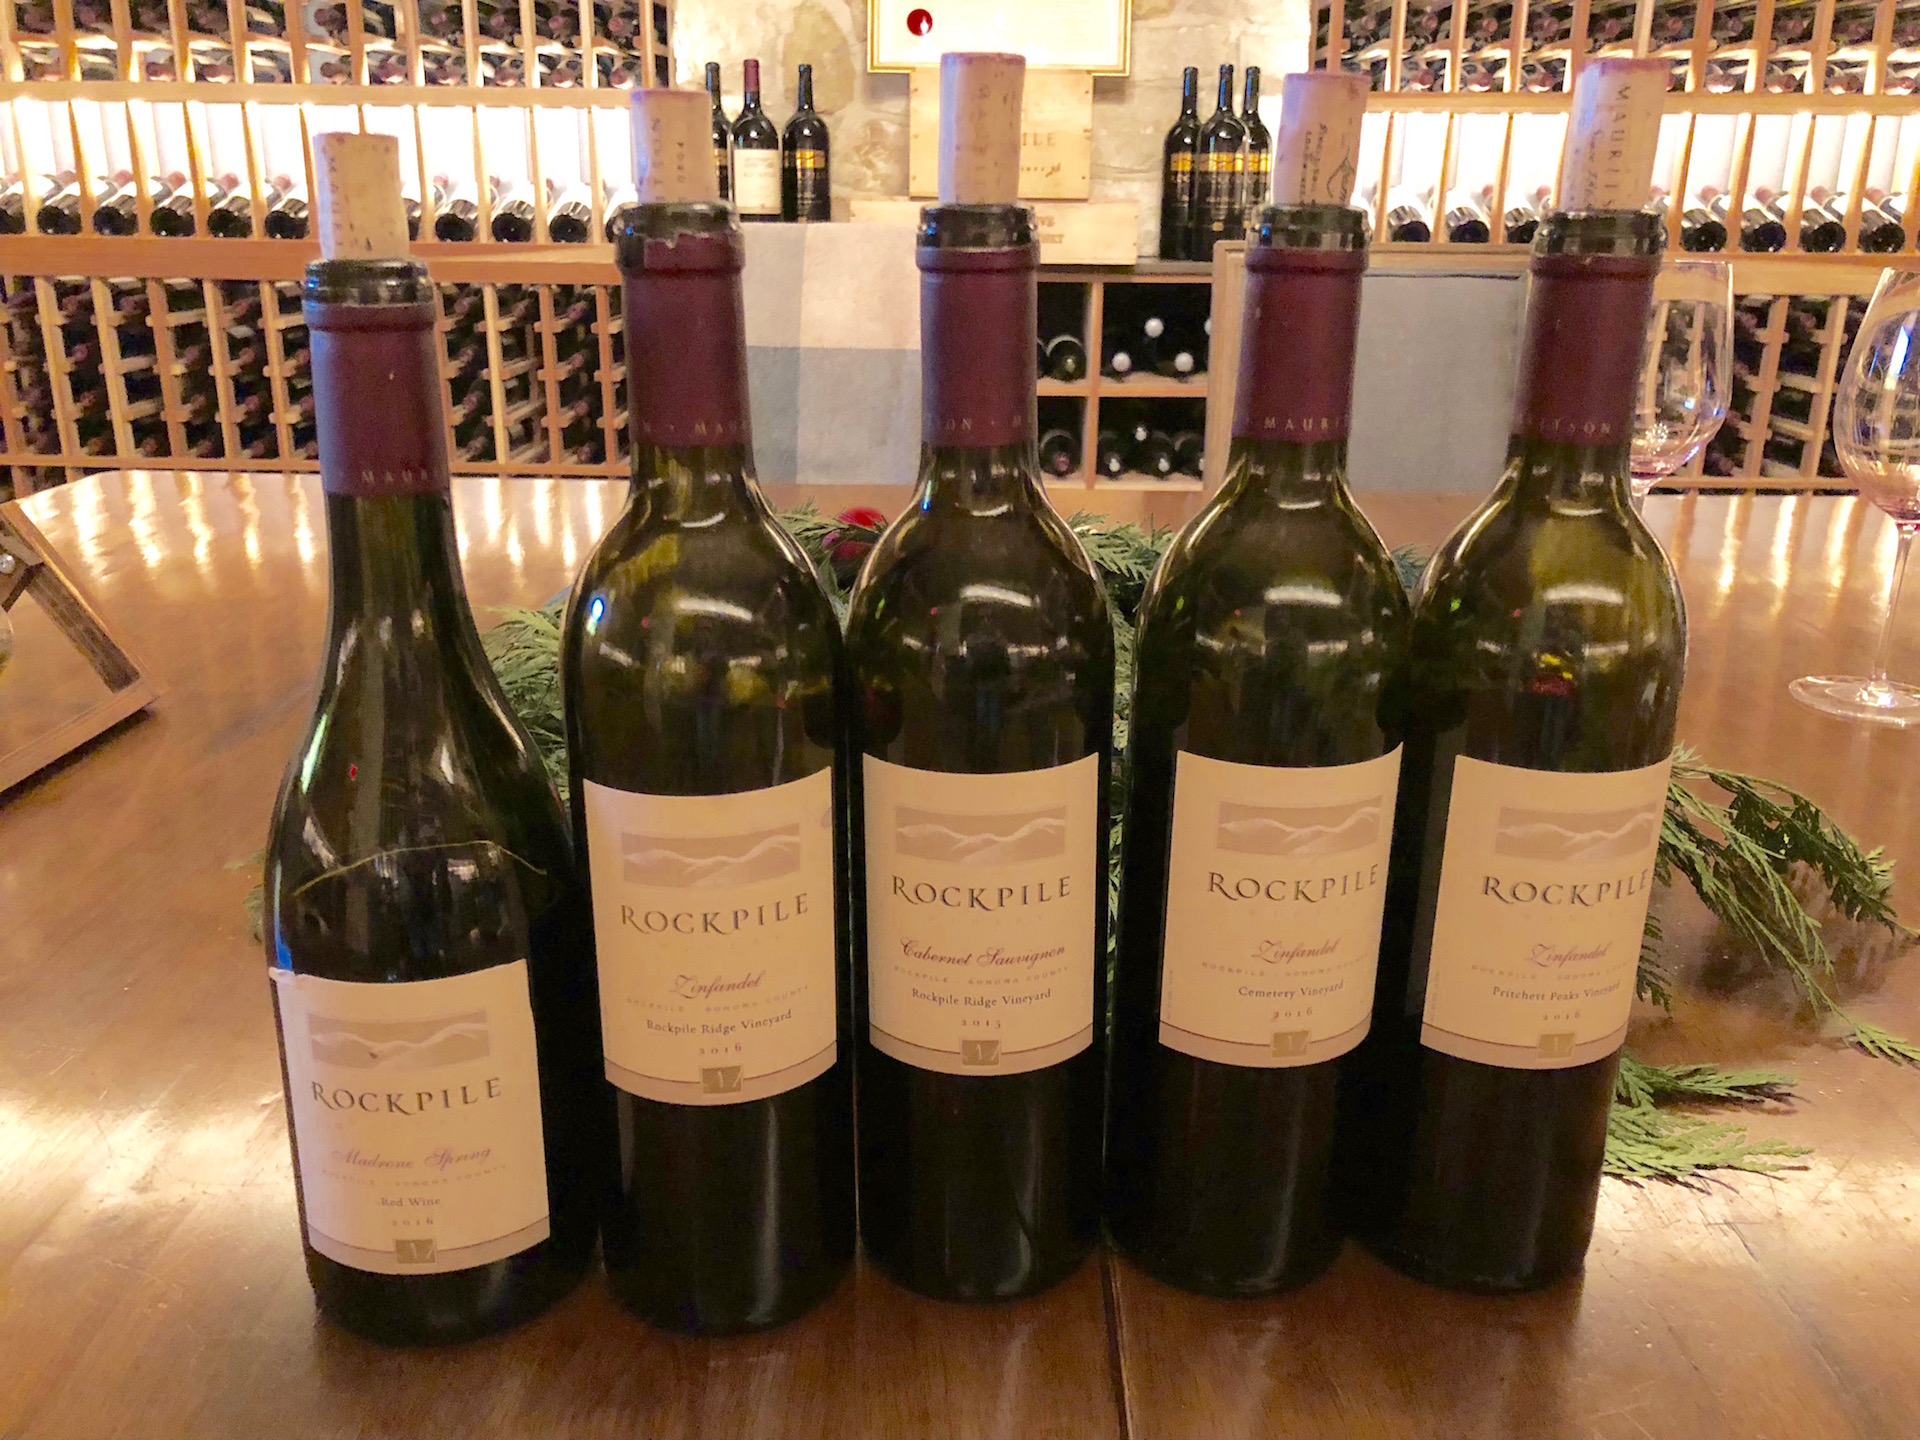 An assortment of the Mauritson Rockpile wines shared by Owner/Winemaker Clay Maurtison